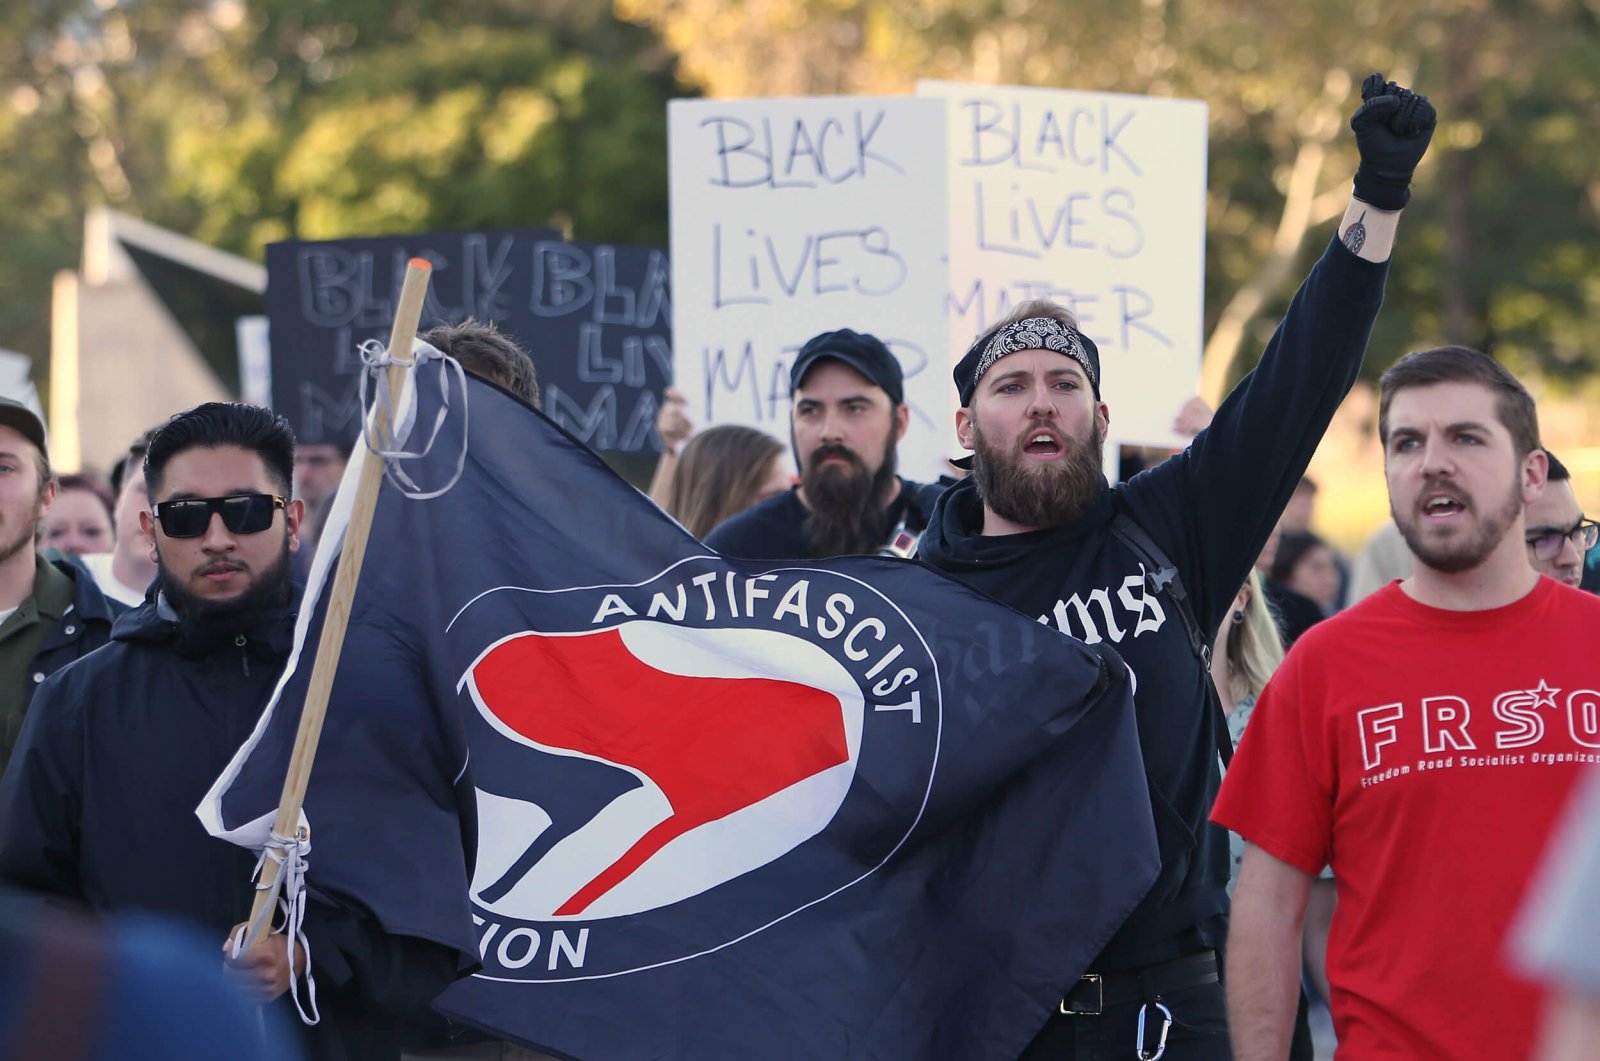 Antifa protesters demonstrate against an event at the University of Utah campus where right-wing writer and commentator Ben Shapiro was speaking, Salt Lake City, Utah, U.S., Sept. 27, 2017. (Getty Images)